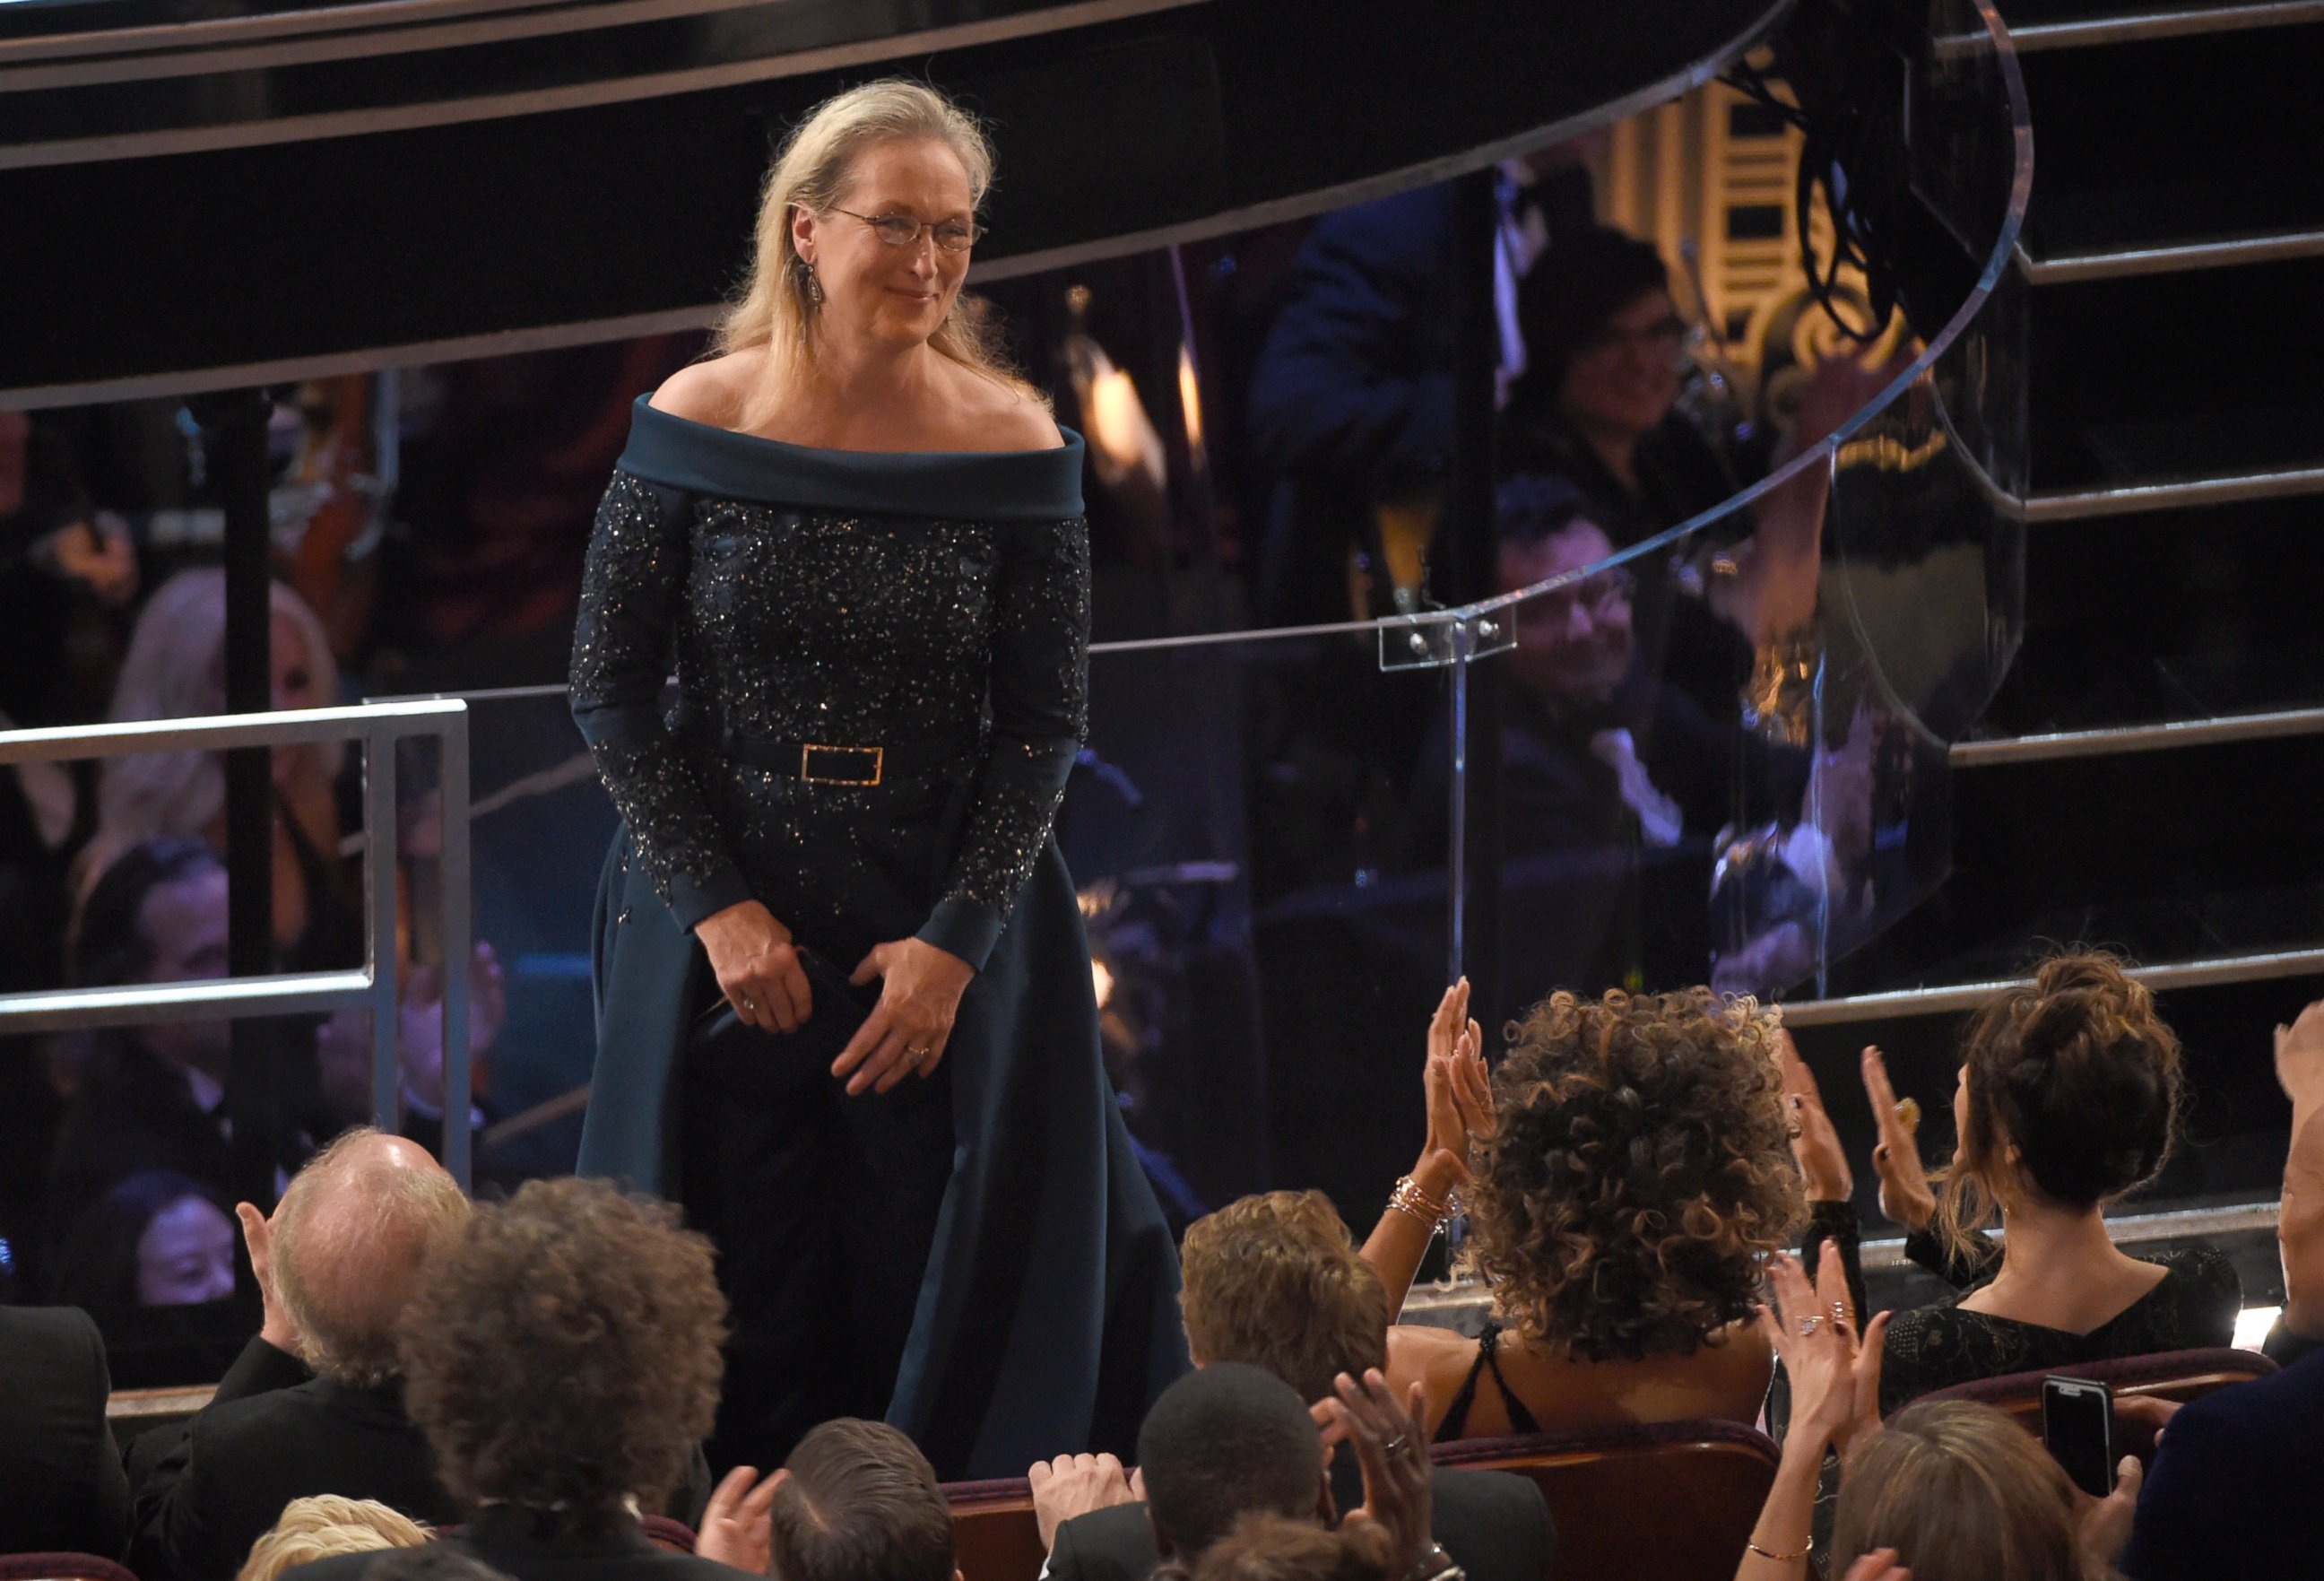 PHOTO: Meryl Streep stands for applause at the Oscars, Feb. 26, 2017, at the Dolby Theatre in Hollywood, Calif. 